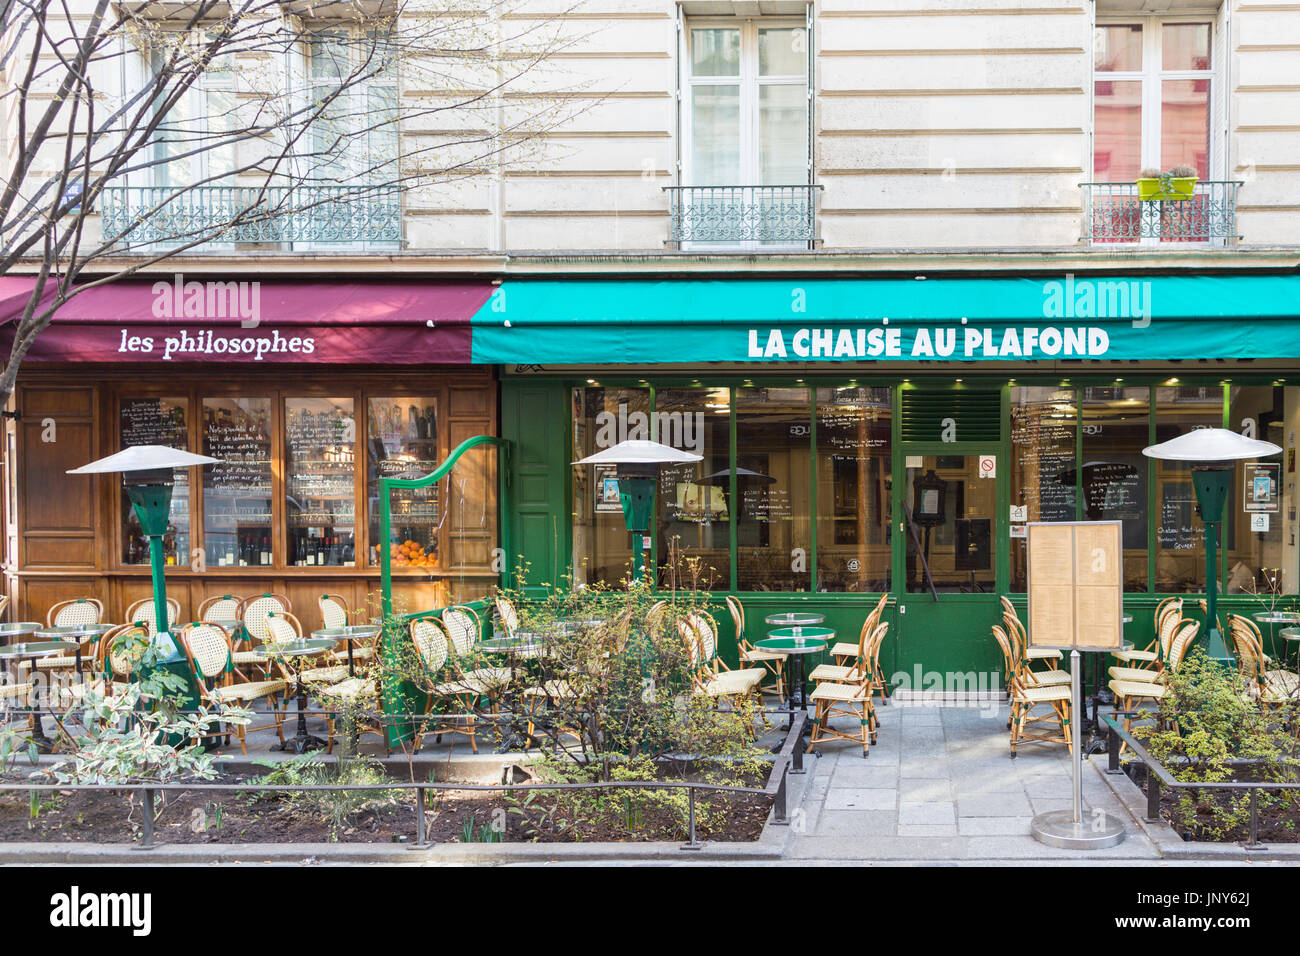 Paris, France - February 29, 2016: Cafes with chairs and tables outside in the Marais, Paris. Stock Photo